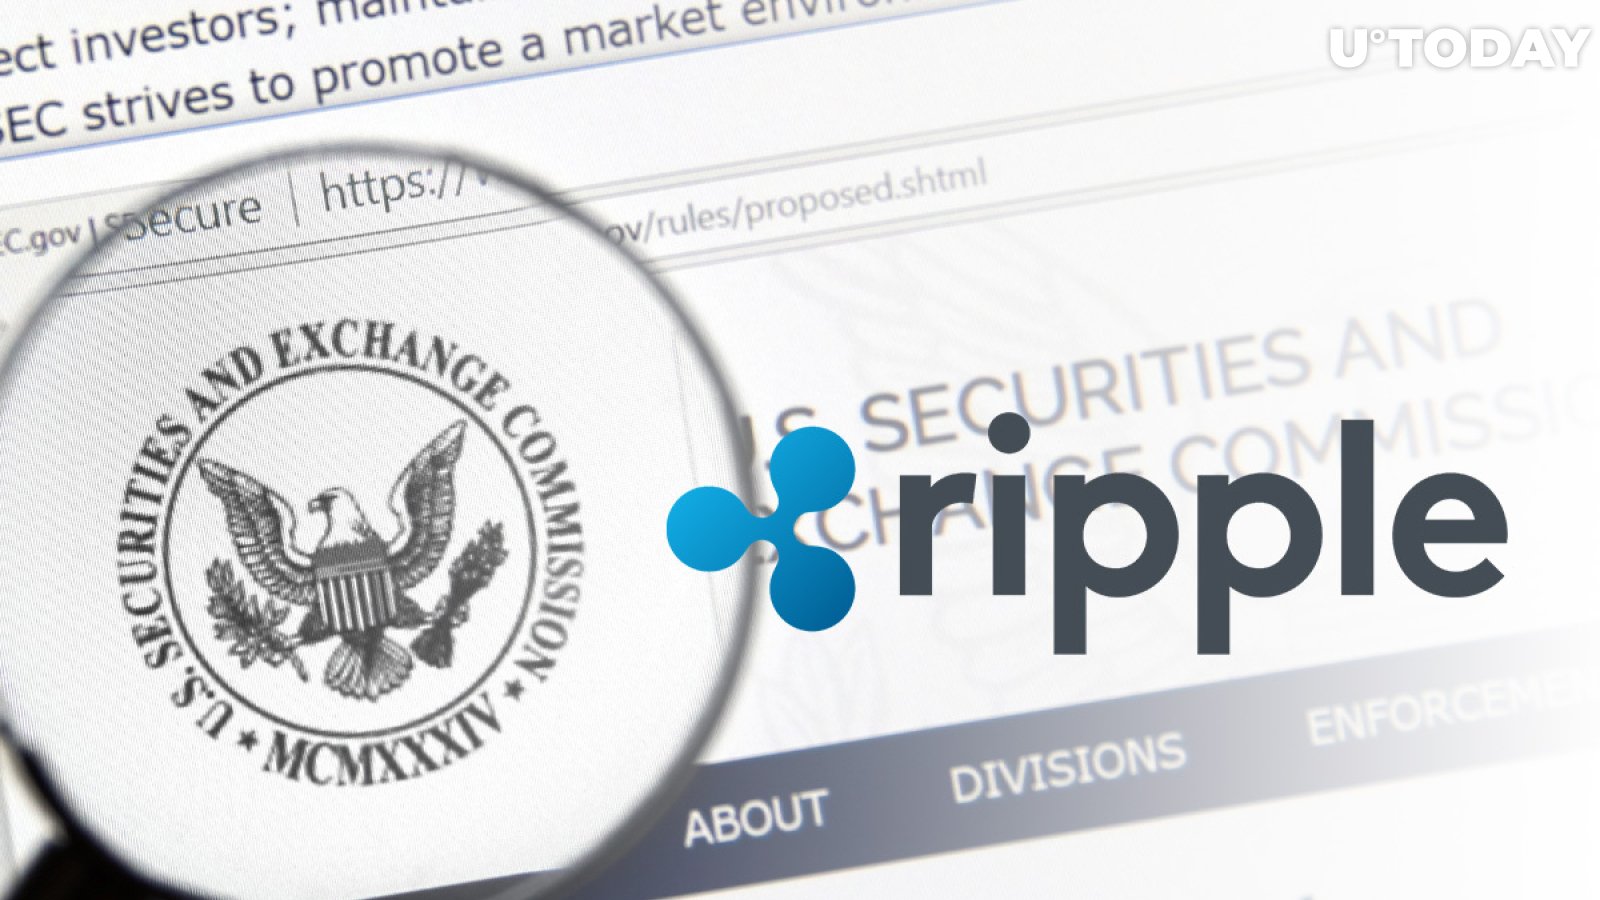 SEC vs. Ripple: This May Be Key Reason Why Ether Was Given Free Pass